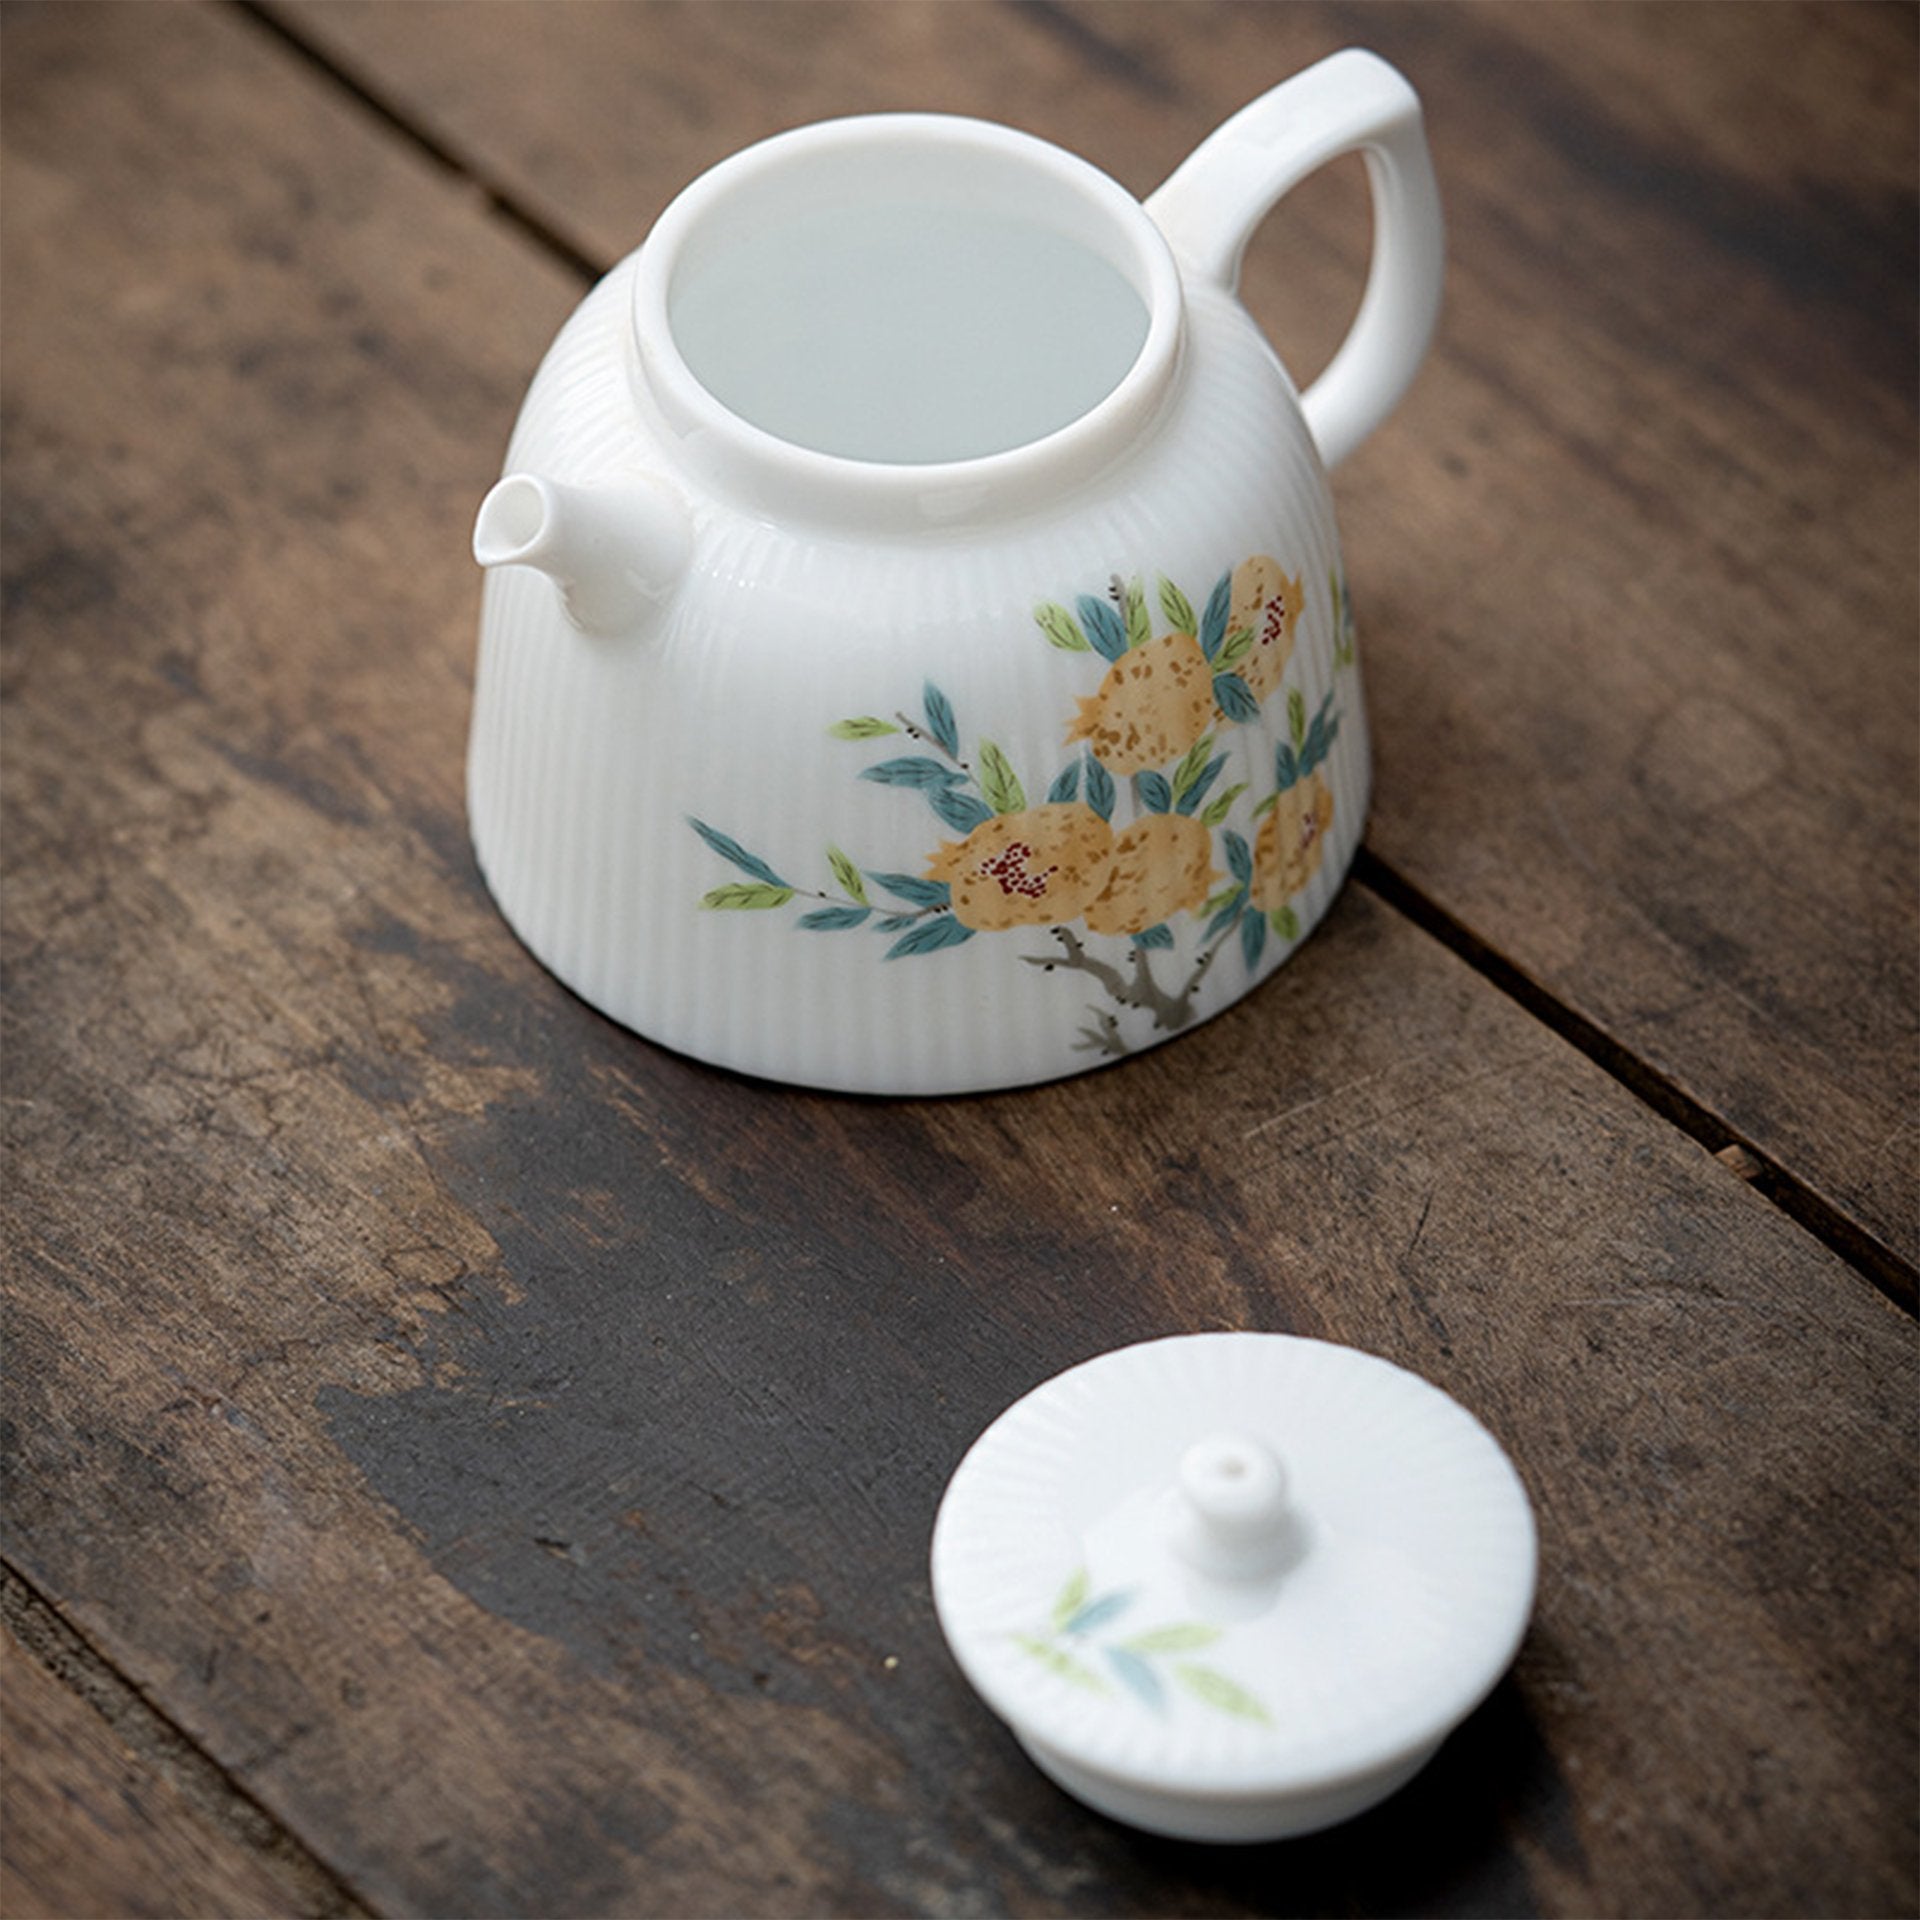 Teapot with lid off on rustic wooden surface, white with floral pattern.